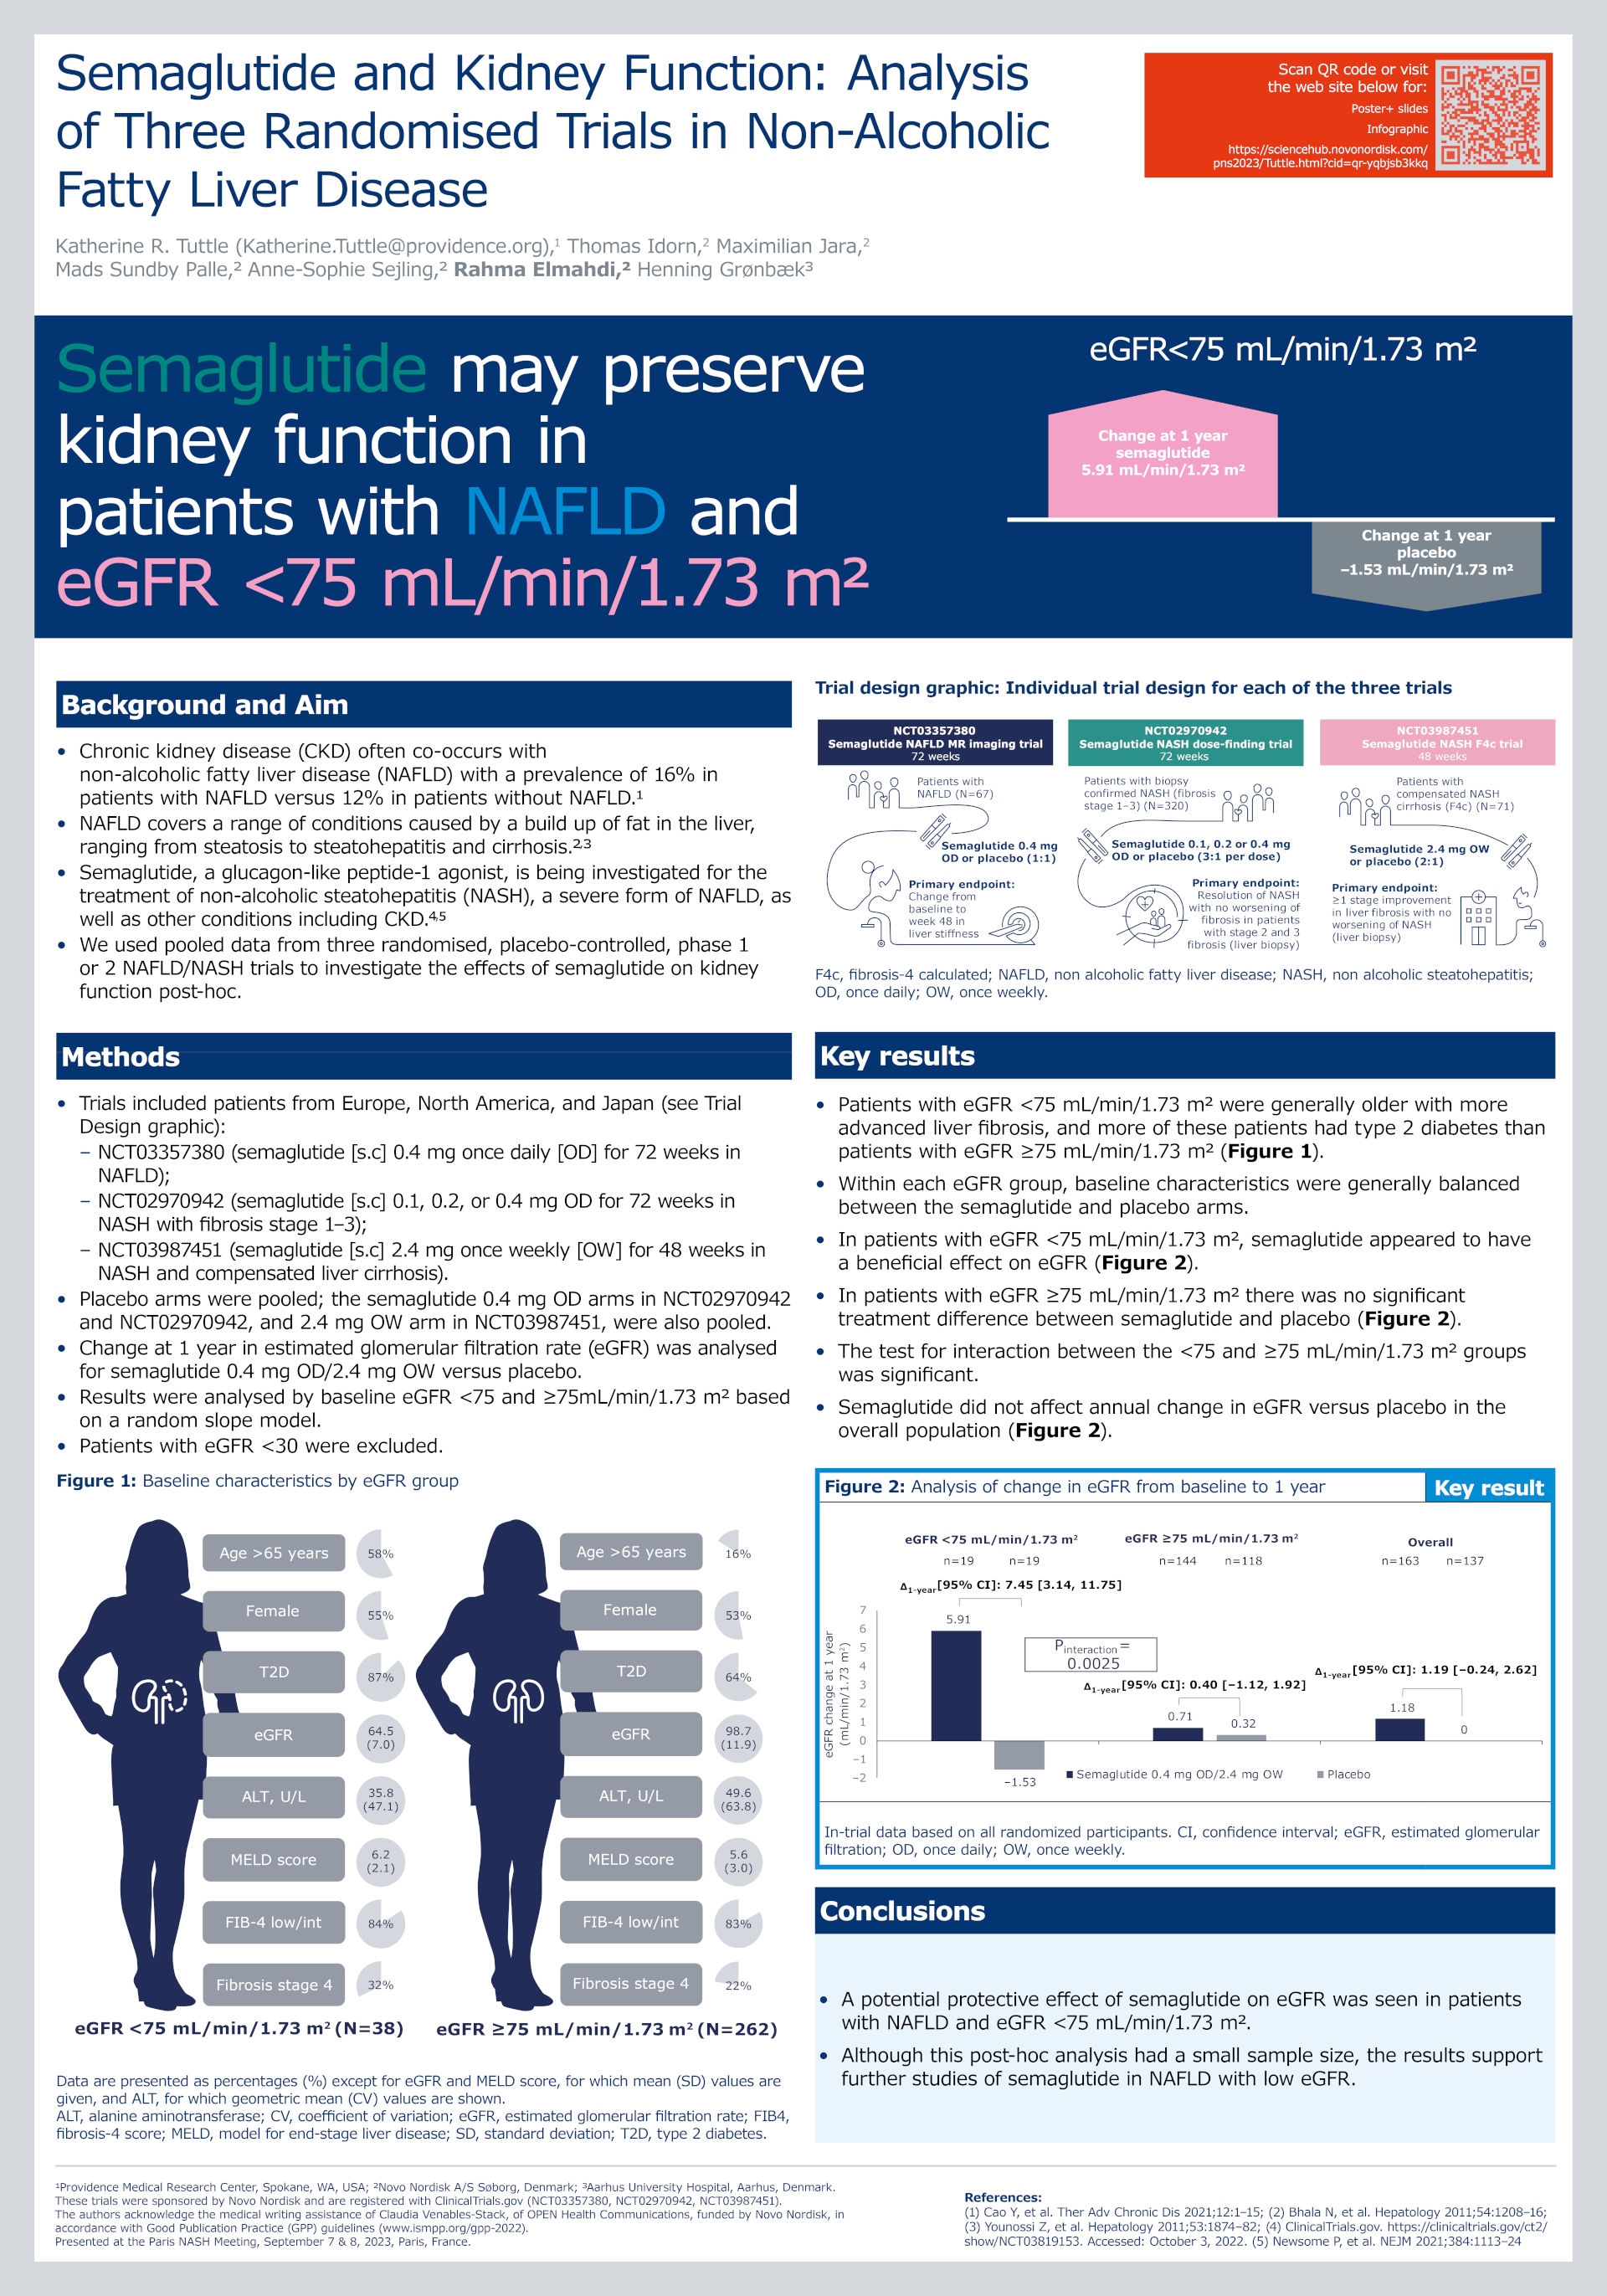 Semaglutide and Kidney function: Analysis of Three Randomized Trails in Non-Alcoholic Fatty Liver Disease - infographic